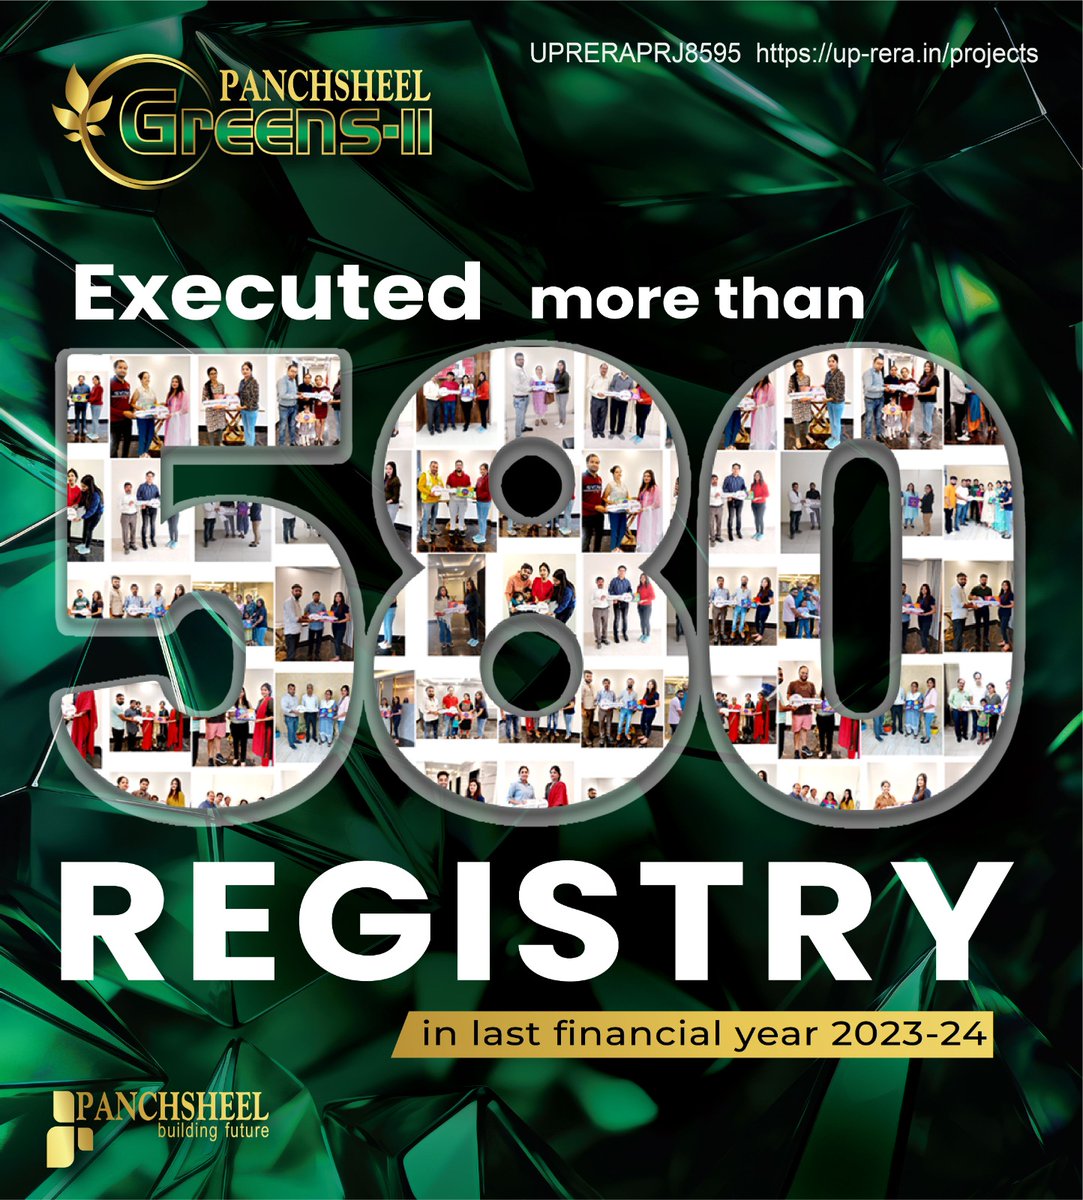 Executed 580+ REGISTRY in last Financial Year 2023-2024
Panchsheel Greens-II
Greater Noida West, UP
2 & 3 BHK Apartments
panchsheelgroup.com

 #awarded #bestresidential #Panchsheel #Greens2 #YogaDeck  #Happiness #GreaterNoidaWest 
 #Amenities #Possession #Registry #registry